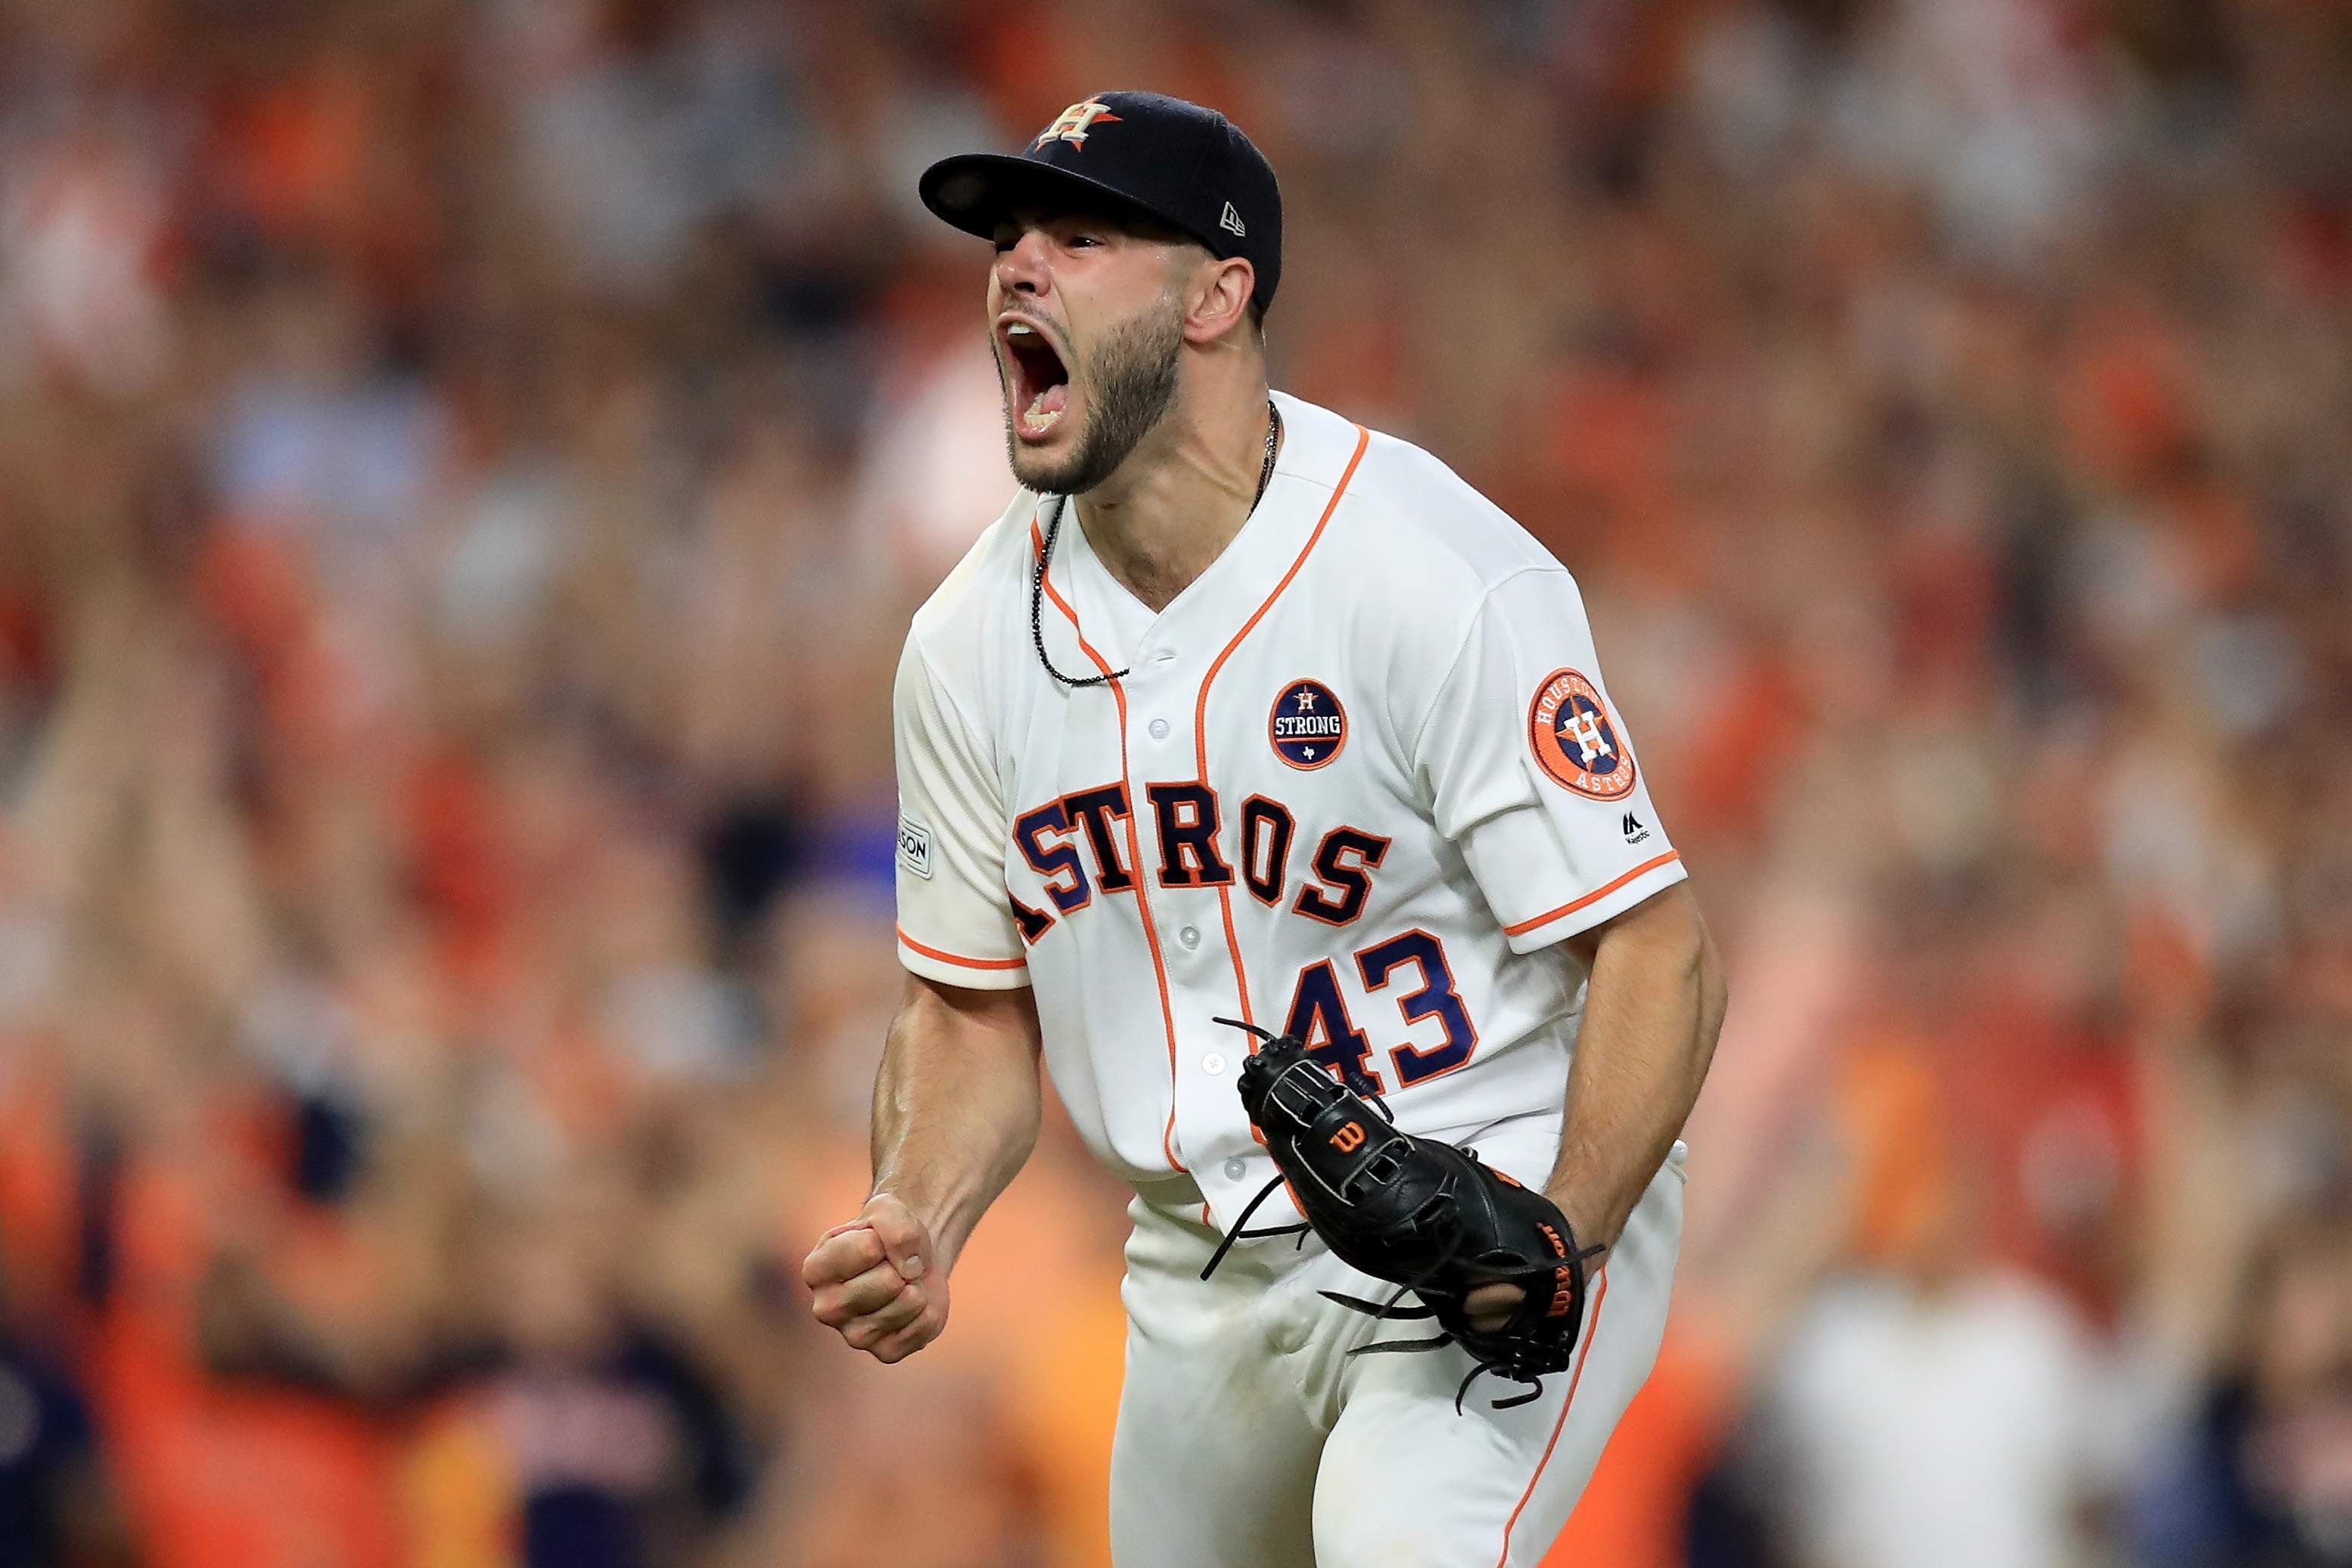 NY Yankees vs. Houston Astros: ALCS schedule, pitching matchups